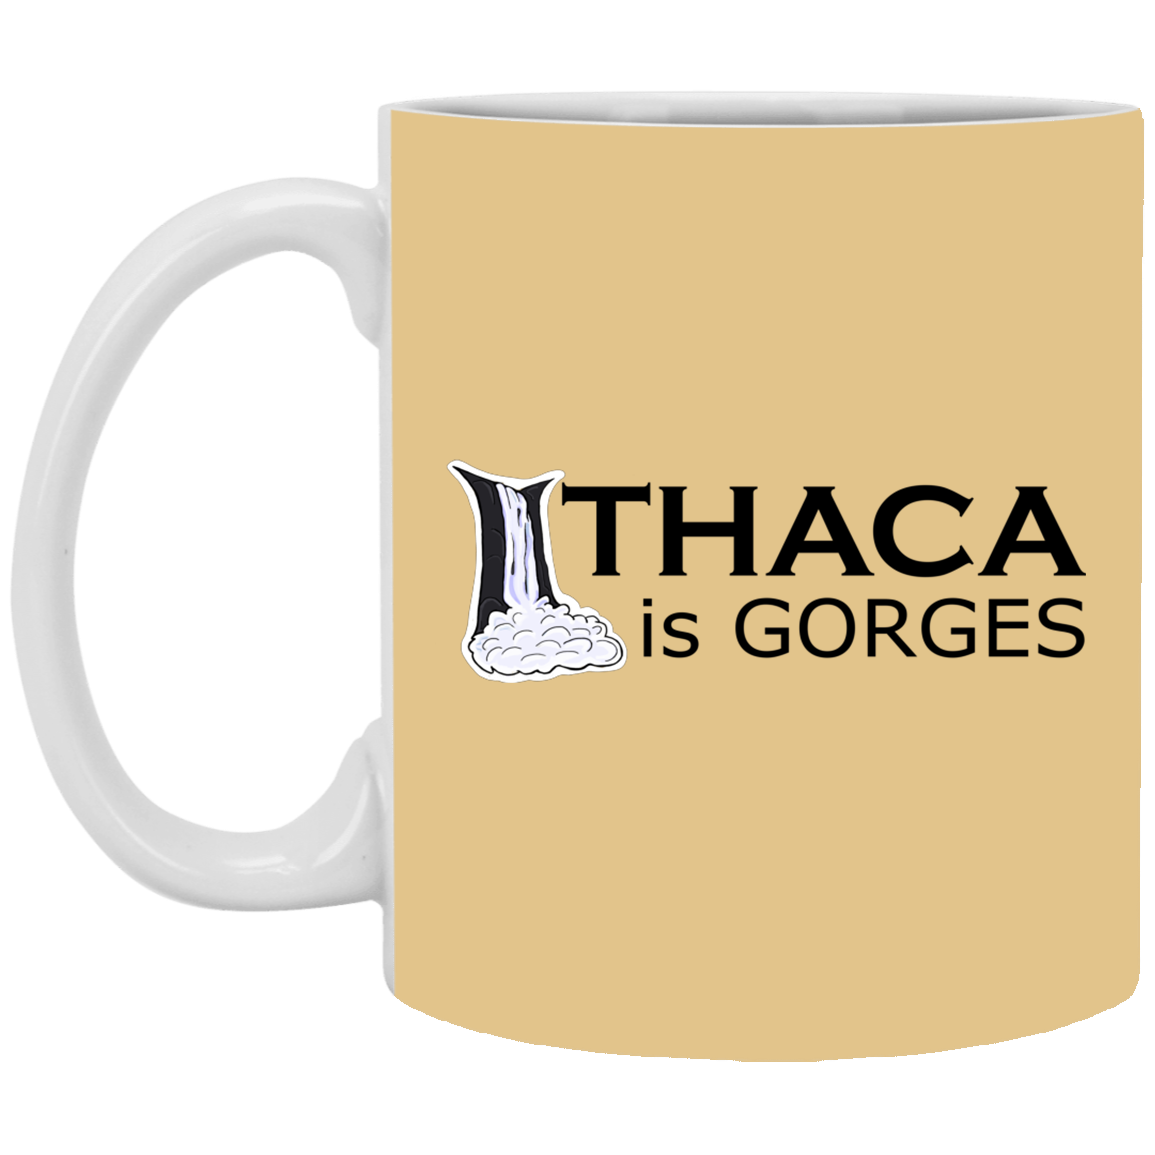 Ithaca Is Gorges 11 oz. White Mug  (Color Graphic)